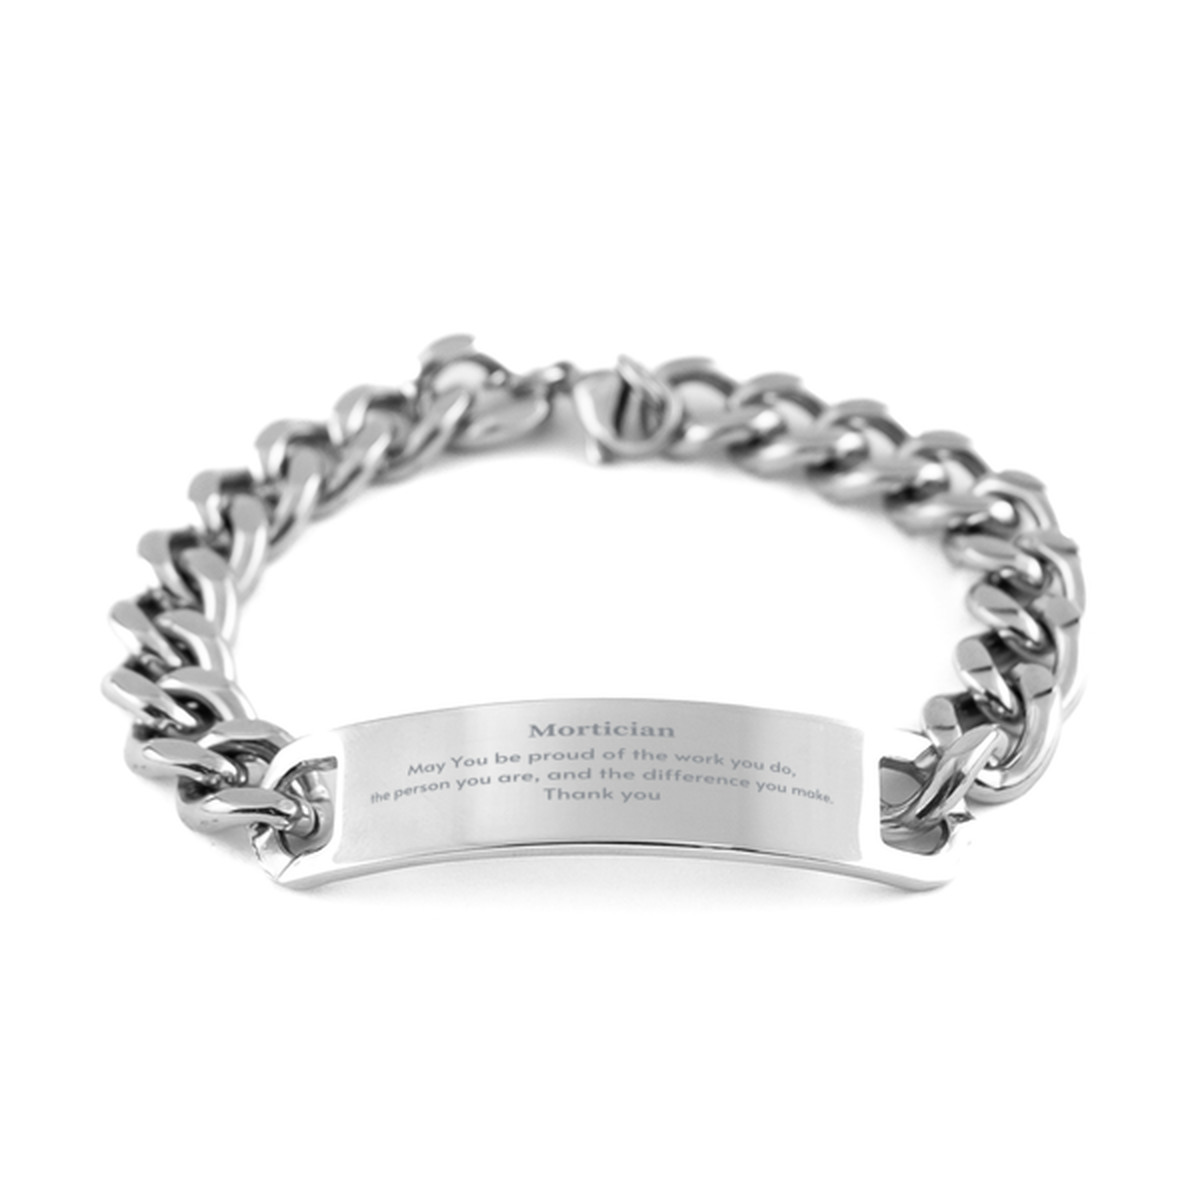 Heartwarming Cuban Chain Stainless Steel Bracelet Retirement Coworkers Gifts for Mortician, Mortician May You be proud of the work you do, the person you are Gifts for Boss Men Women Friends